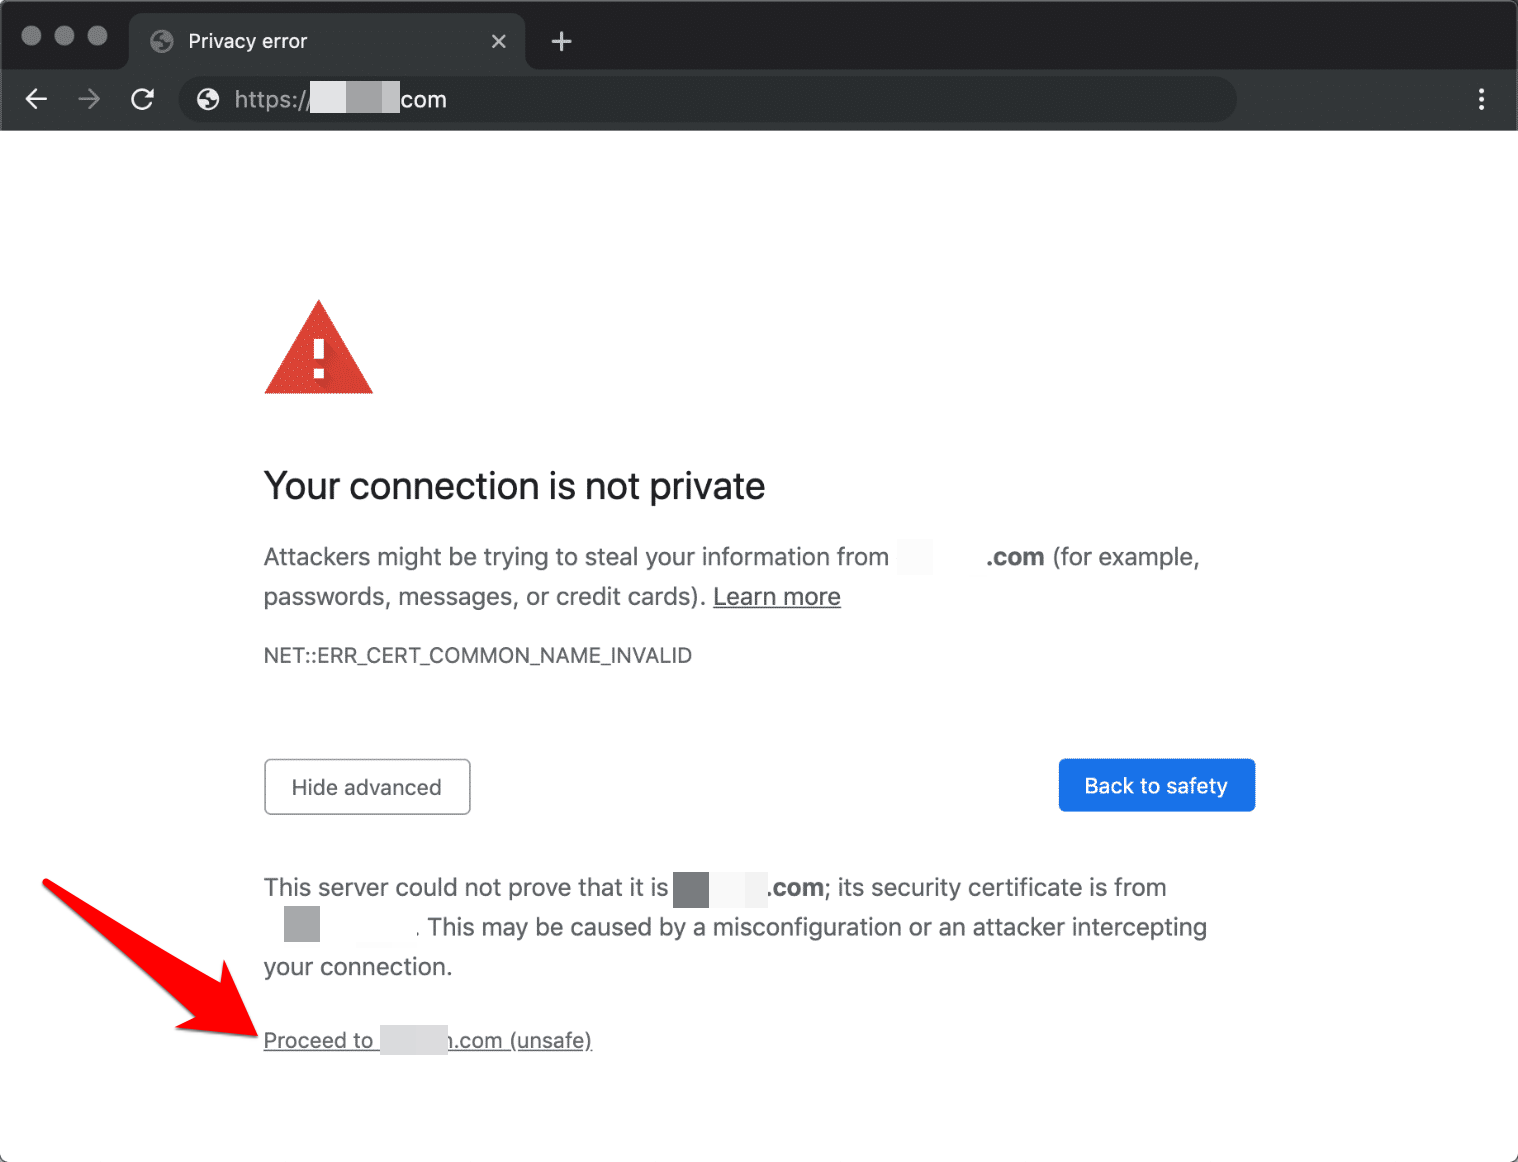 Proceed to Website Unsafe link on Chrome